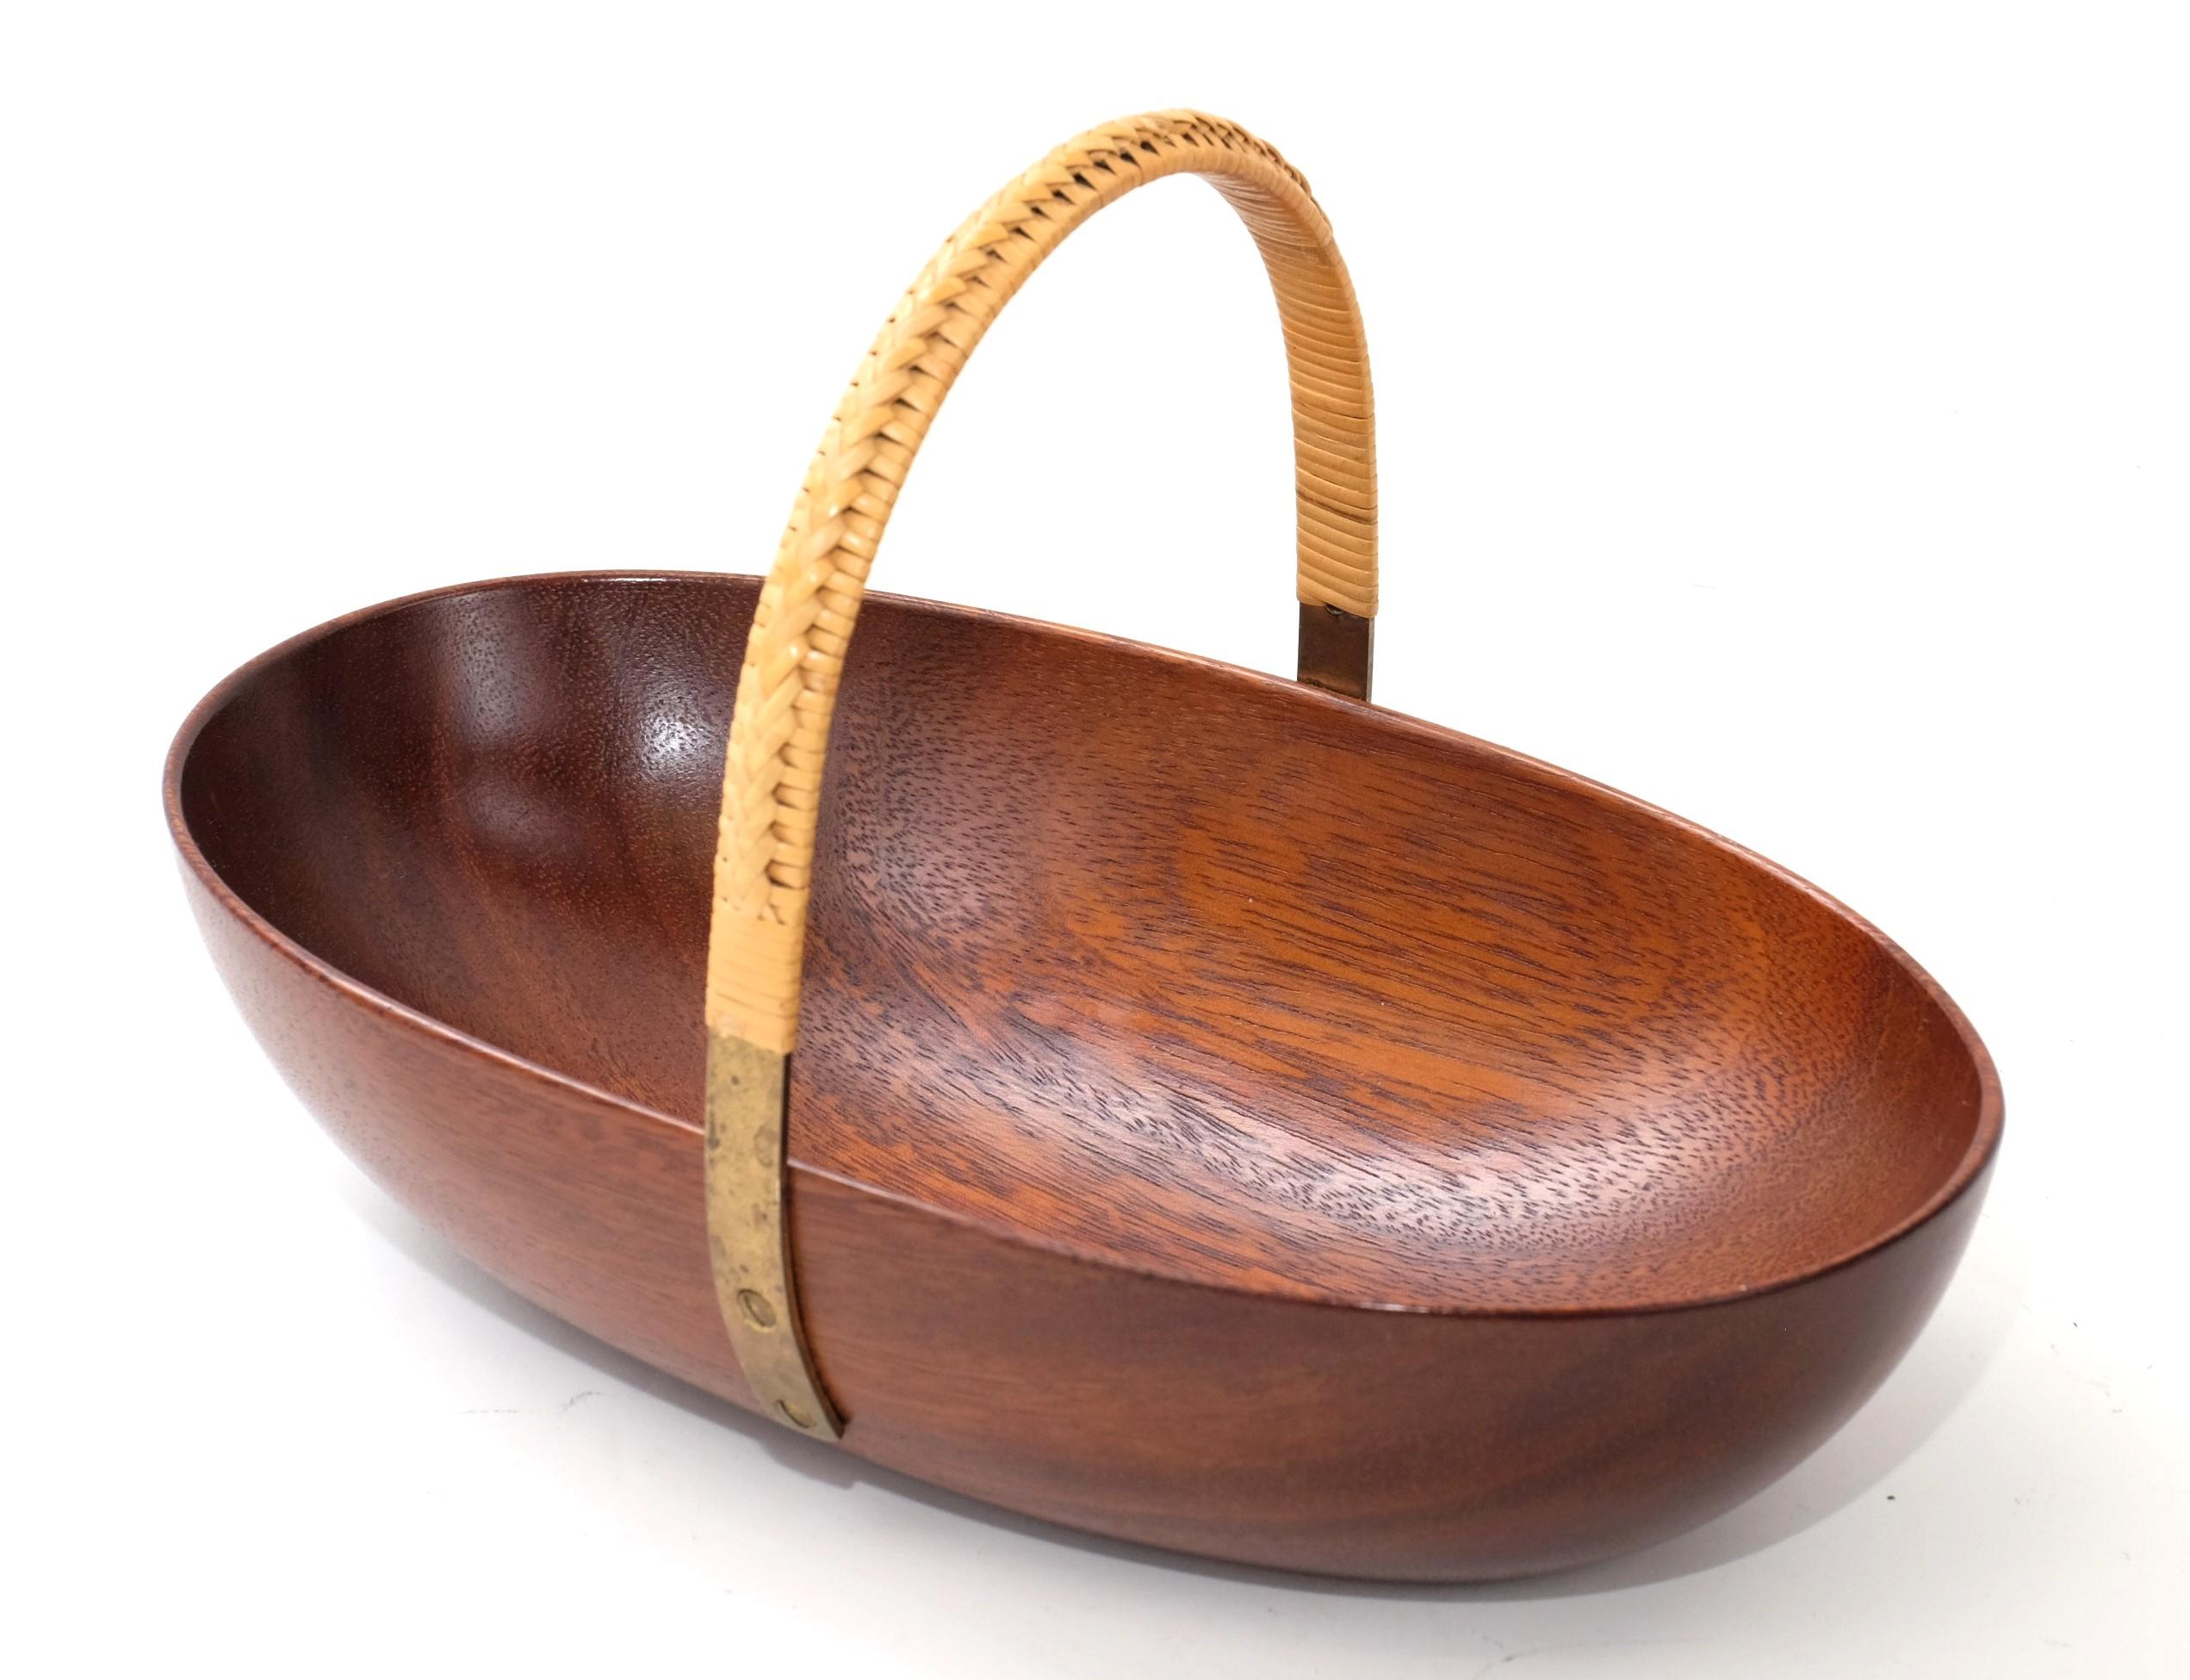 Original 1950s bowl element made by of solid teak wood and brass loop with rattan at the top for carrying. This fantastic piece was designed by Carl Auböck in the 1950s, and handcrafted in his Workshop in Vienna, Austria in the 1950s. 

It is a very